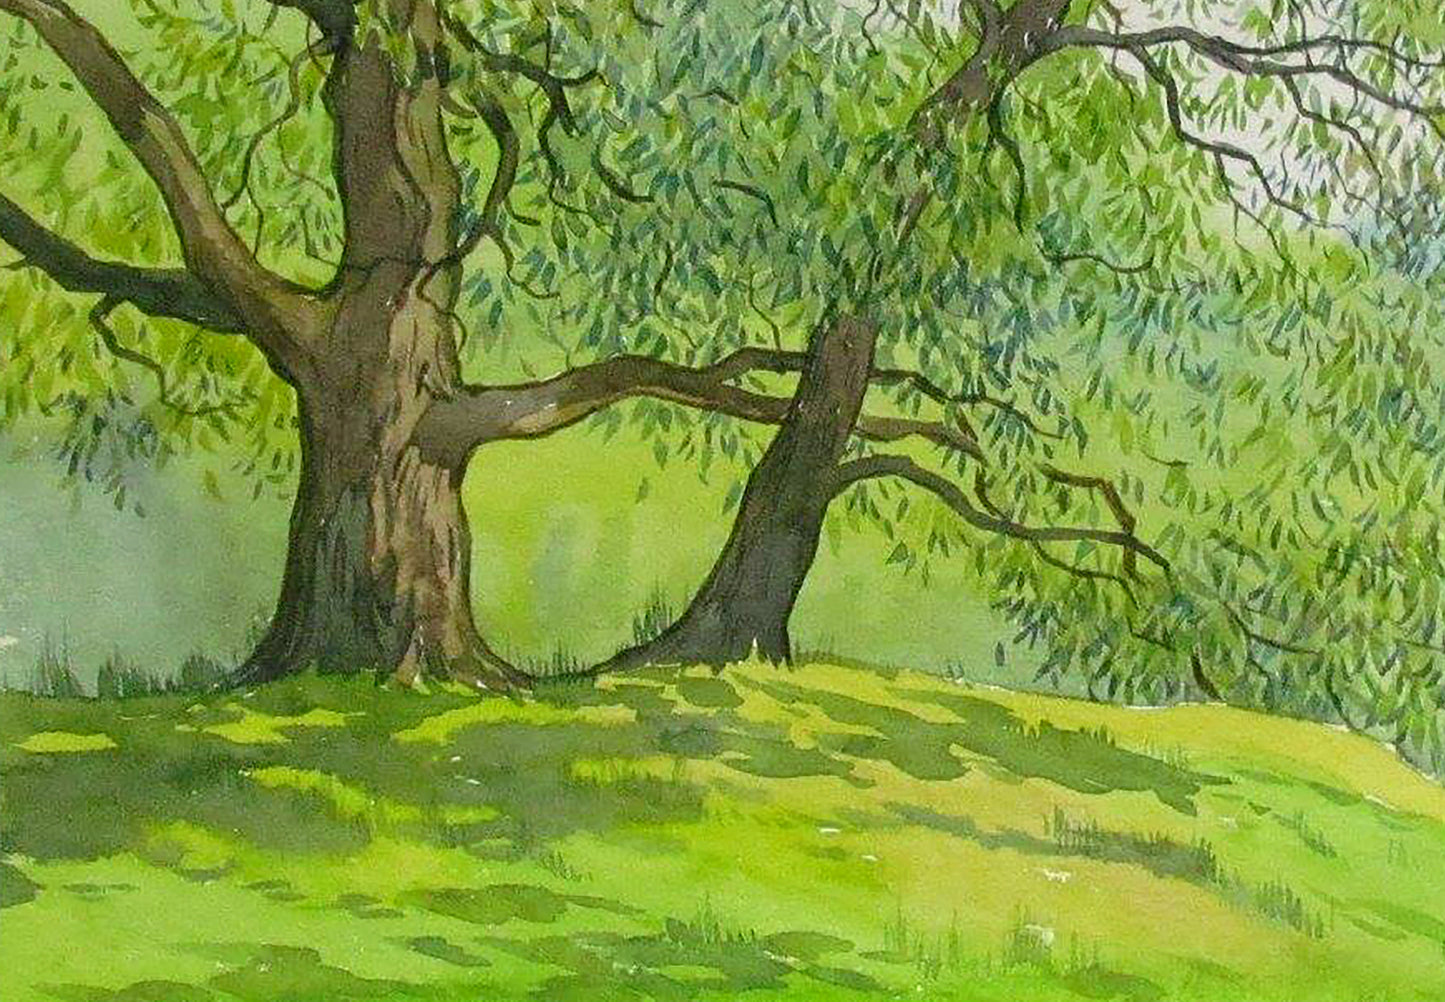 Watercolor painting In the summer forest Savenets Valery